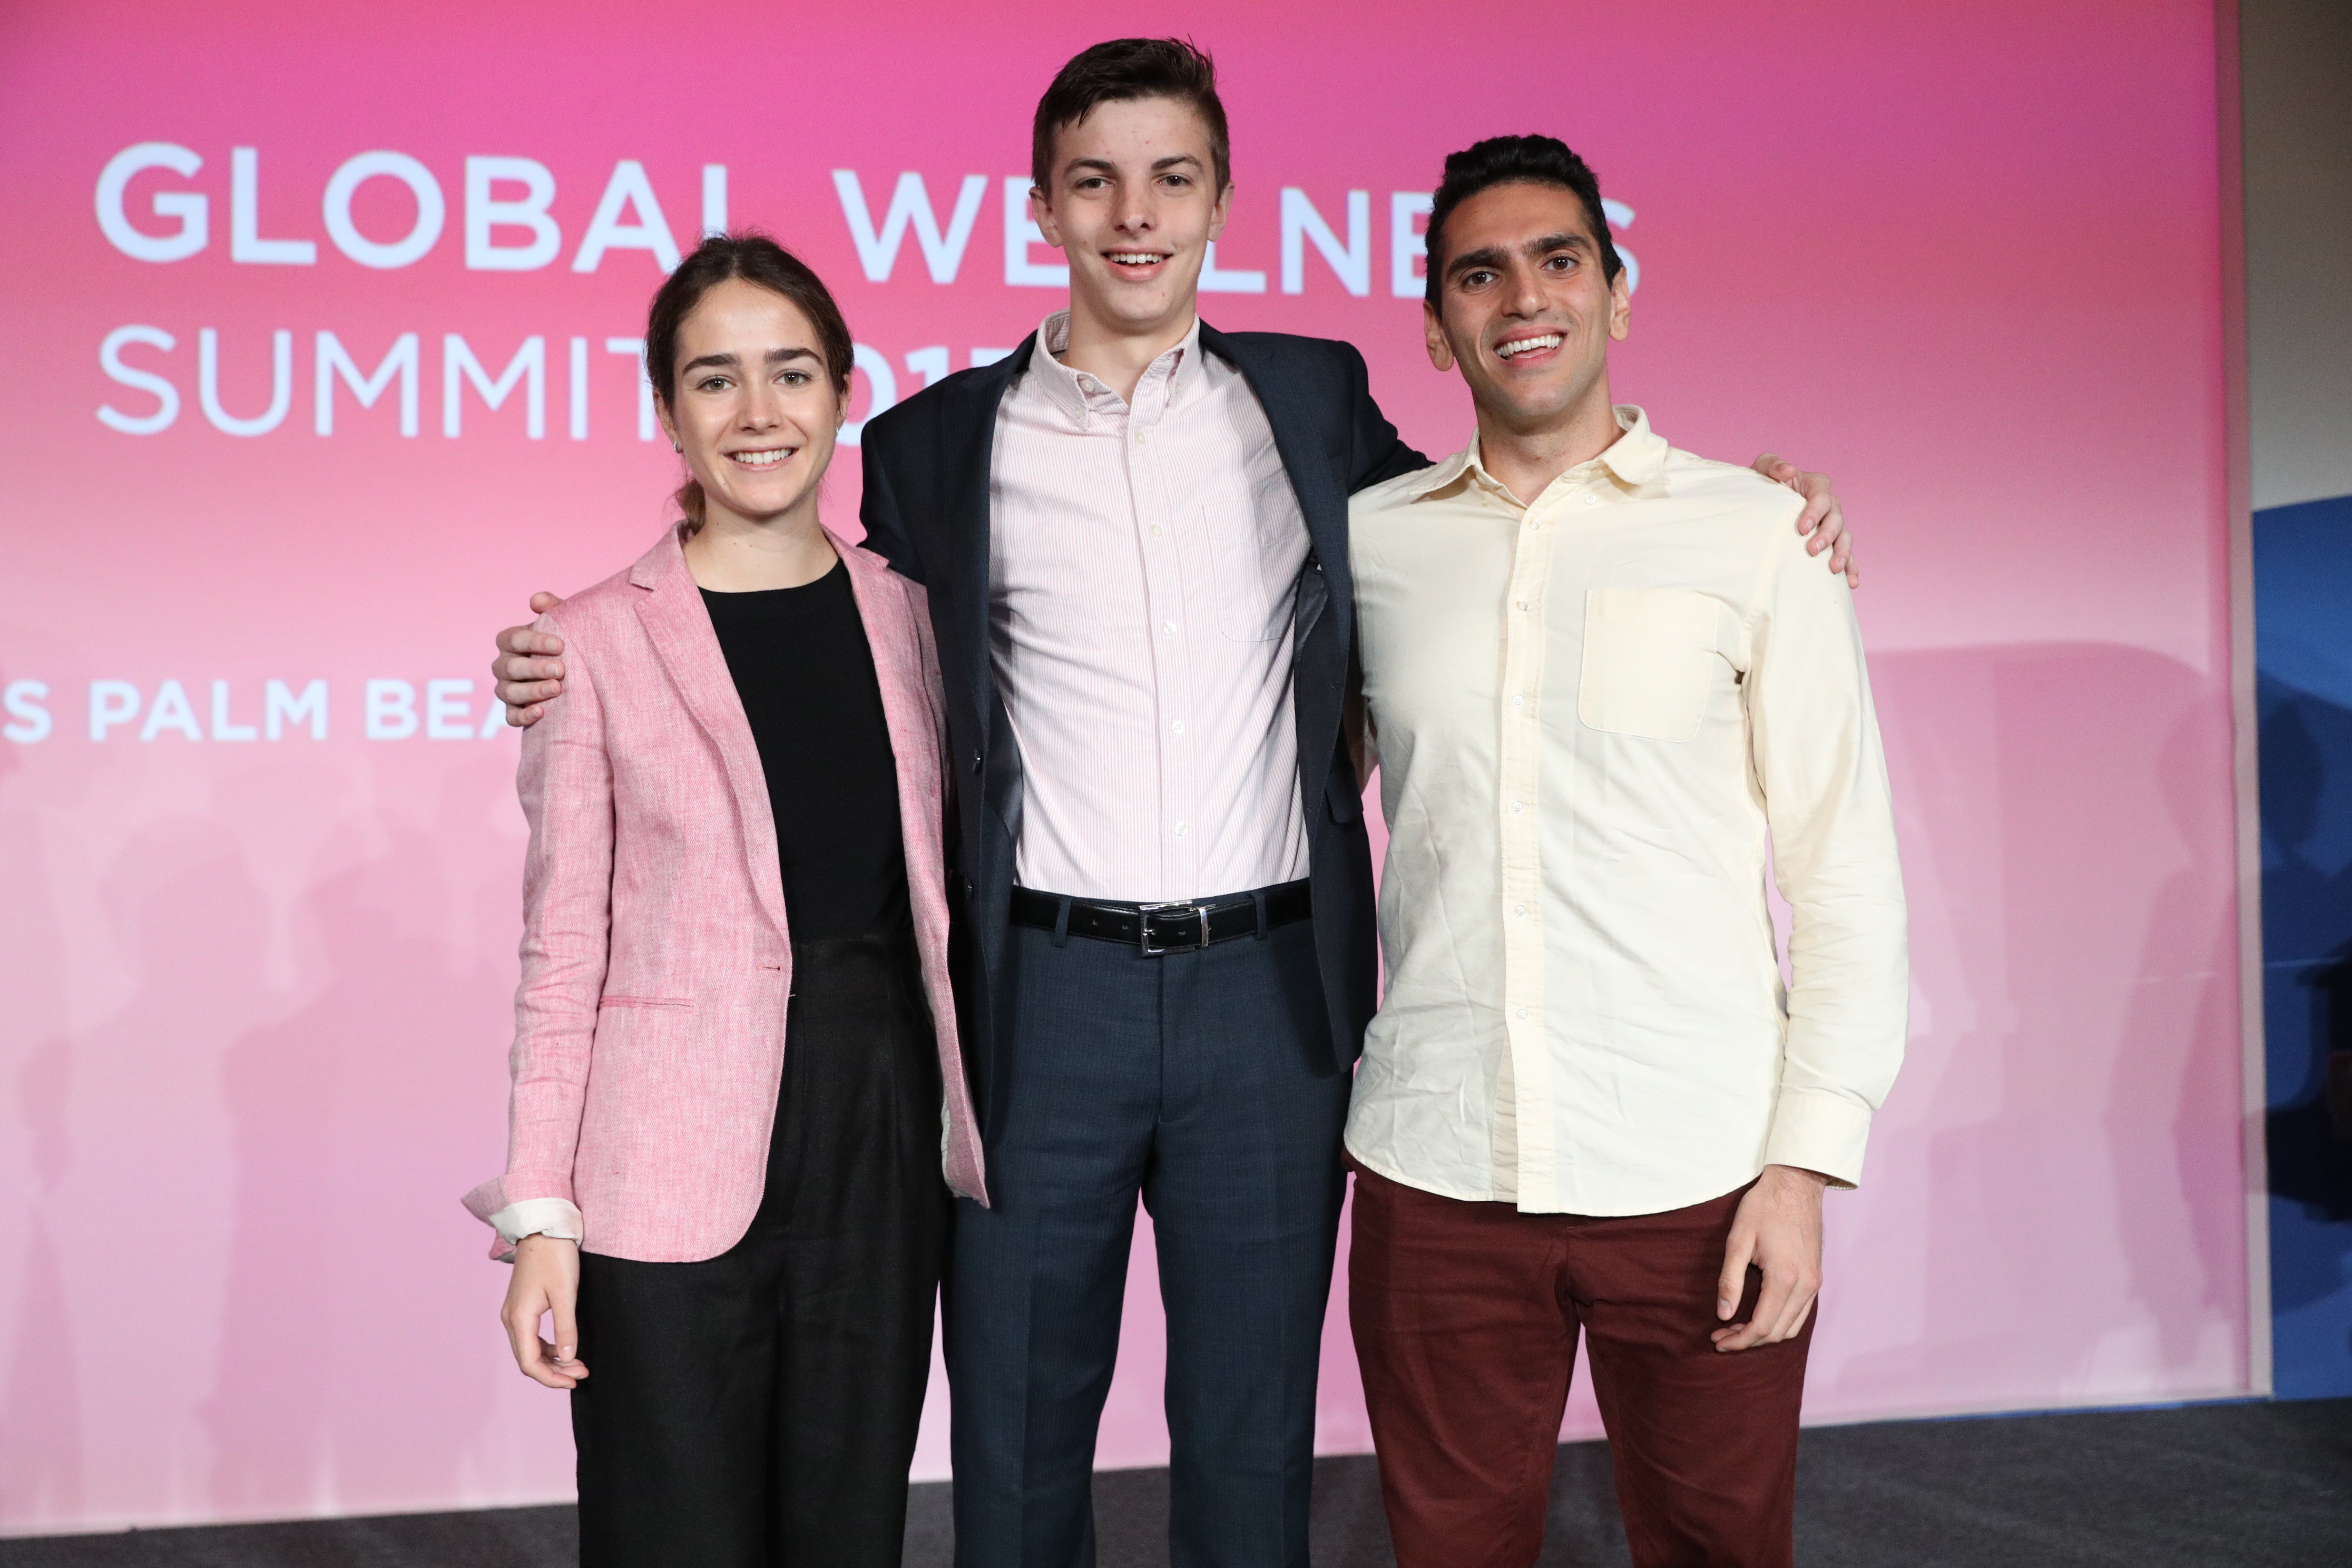 Left to right: Maria Gil, École de Lausanne, Jarrod Luca, Florida State University, Mikey Ahdoot, University of Southern California